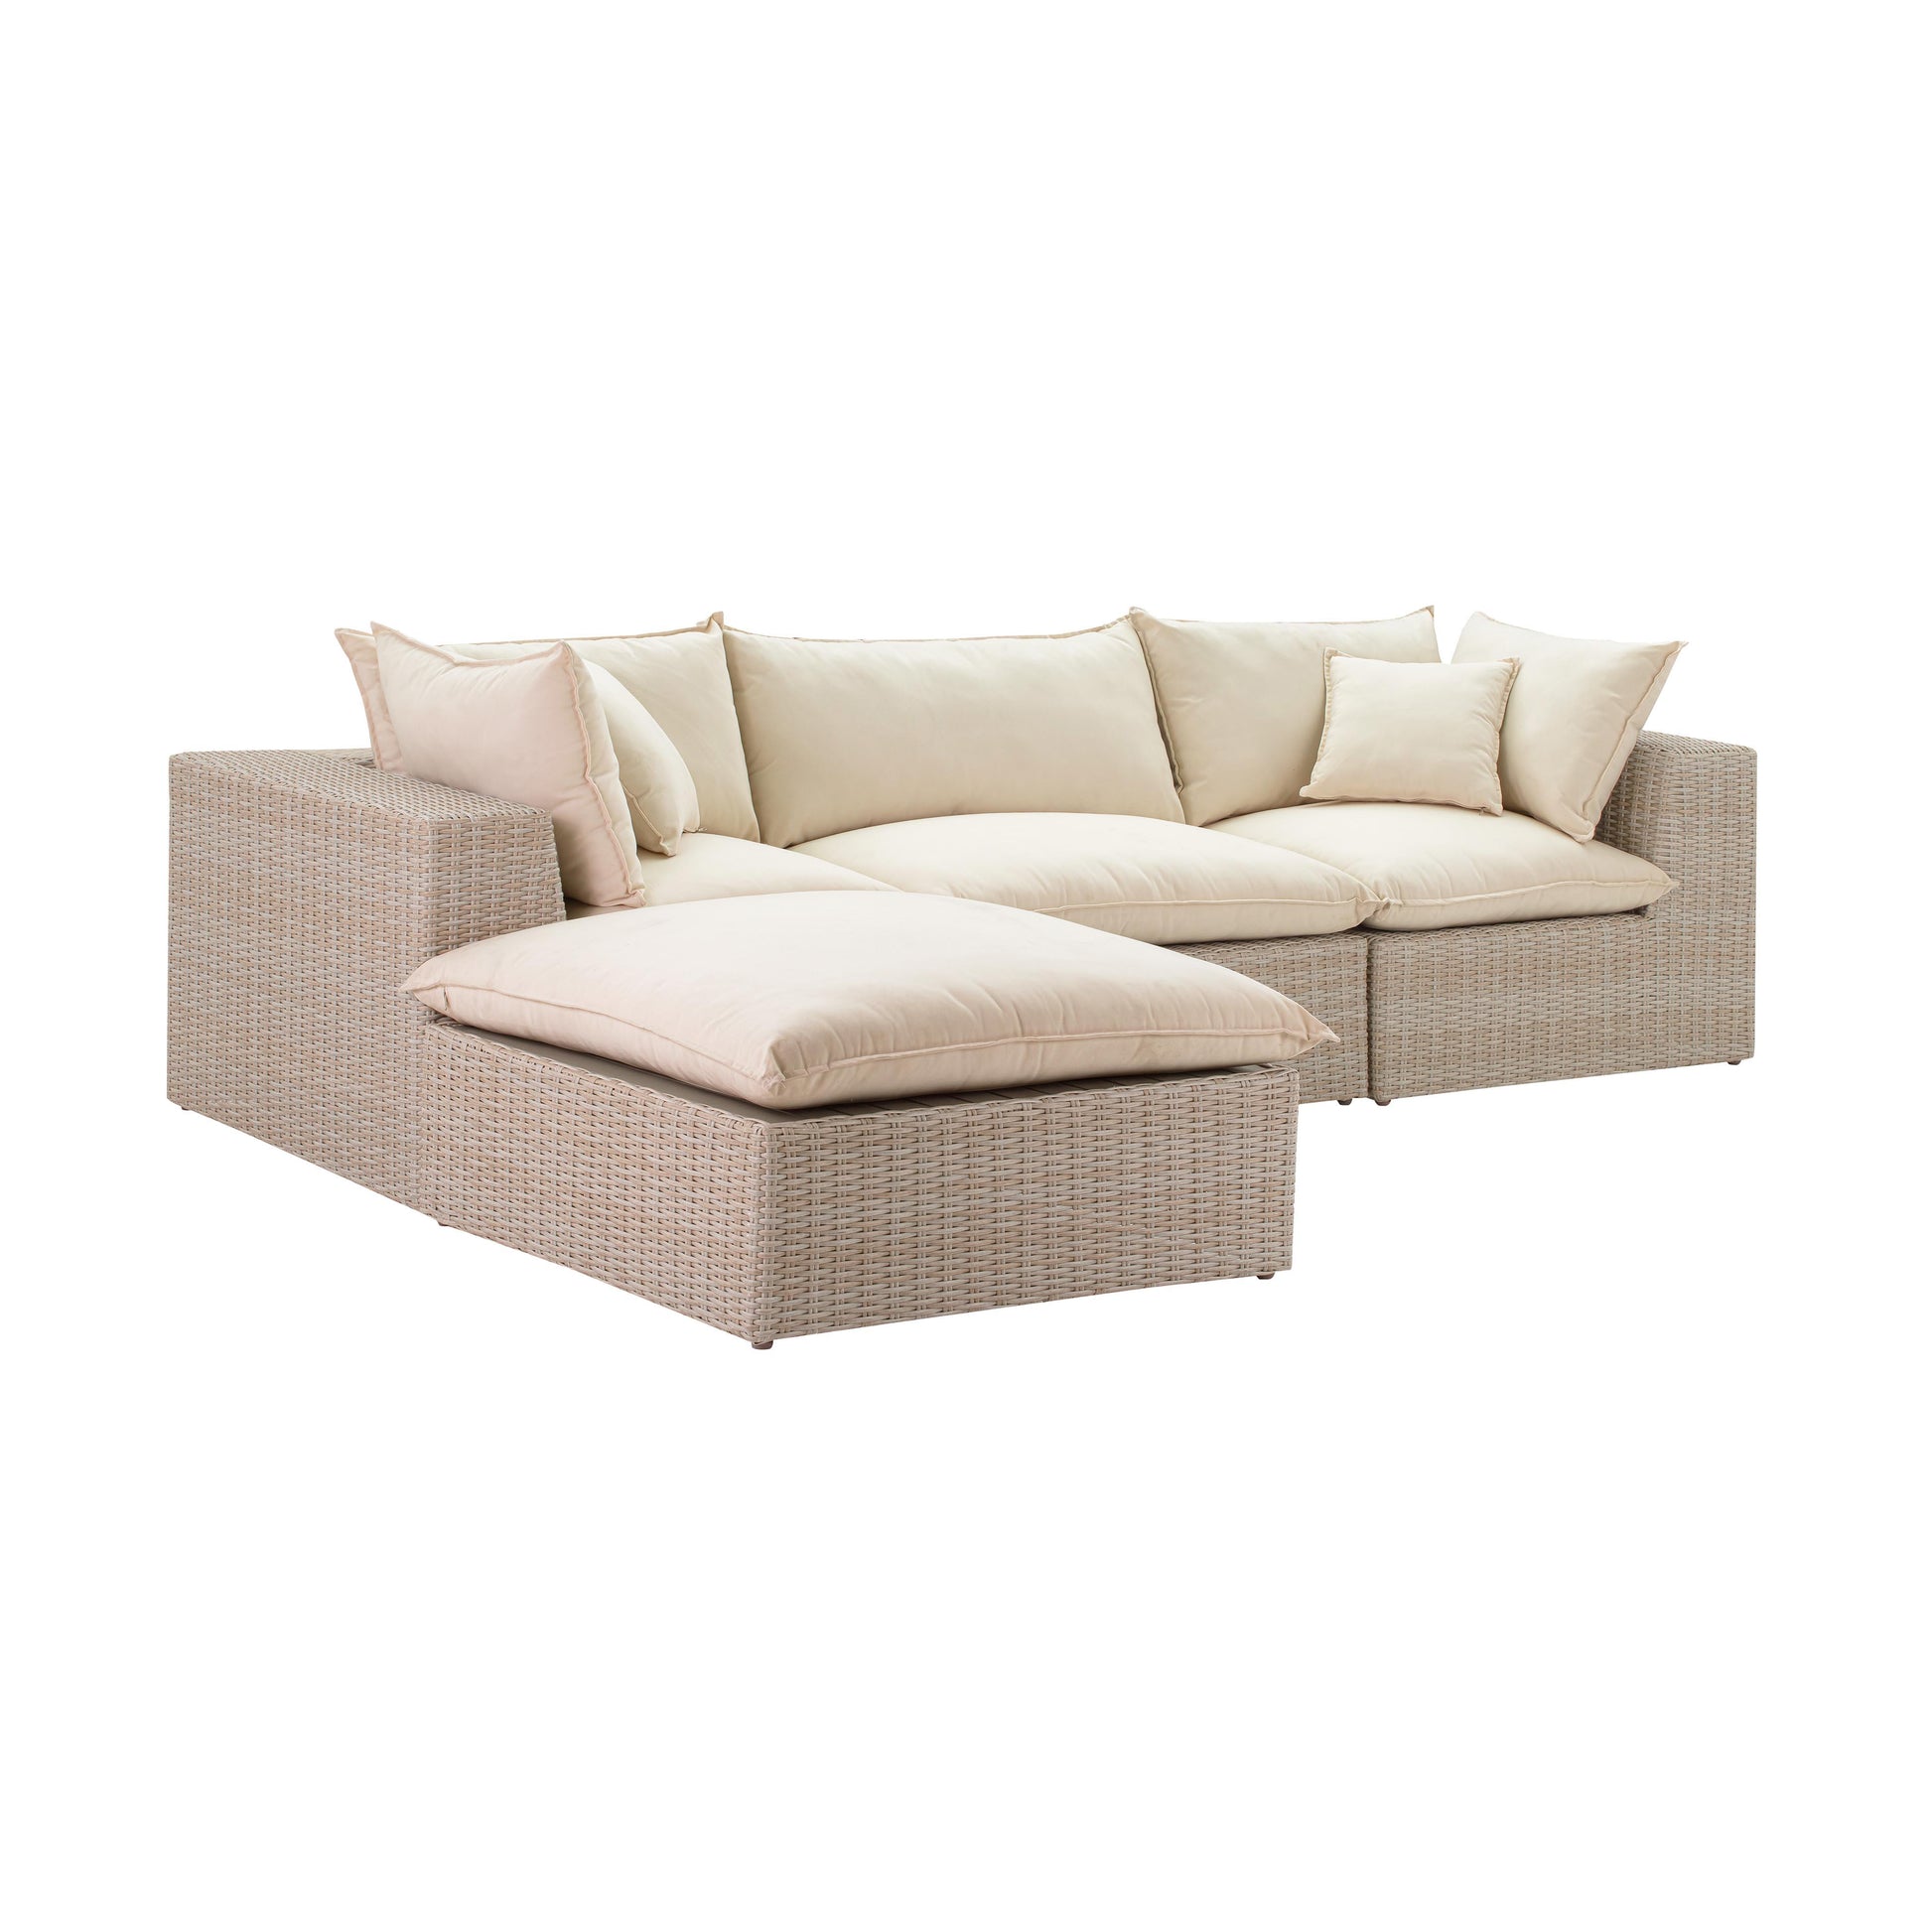 Cali Natural Wicker Outdoor Modular Sectional by TOV